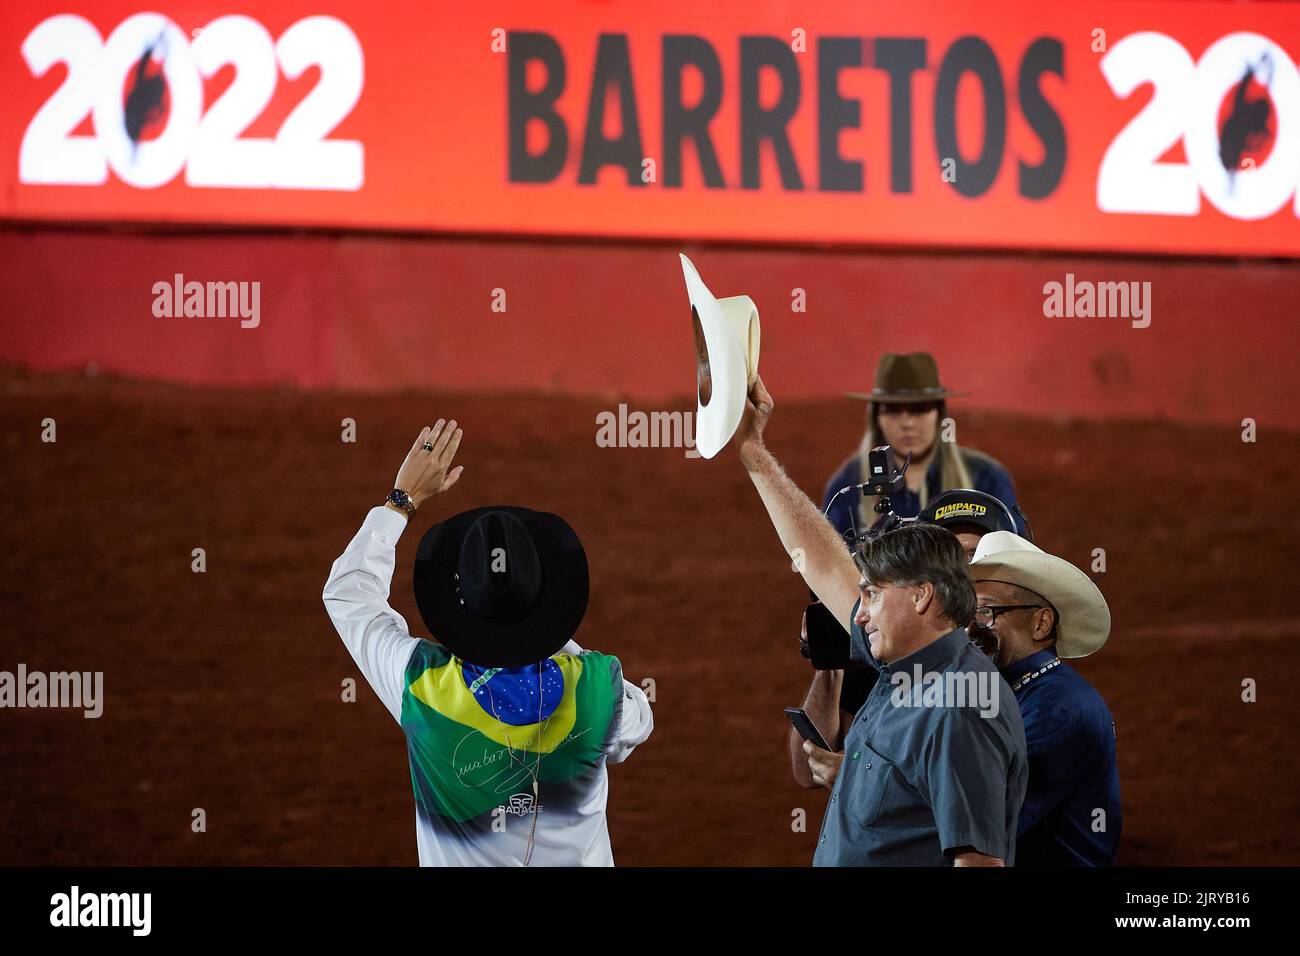 Barretos, Brazil. 26th Aug, 2022. Brazilian president and re-election candidate Jair Bolsonaro attends the opening of the 28th International Rodeo in Barretos, Sao Paulo, Brazil, on August 26, 2022. (Photo by Igor do Vale/Sipa USA) Credit: Sipa USA/Alamy Live News Stock Photo